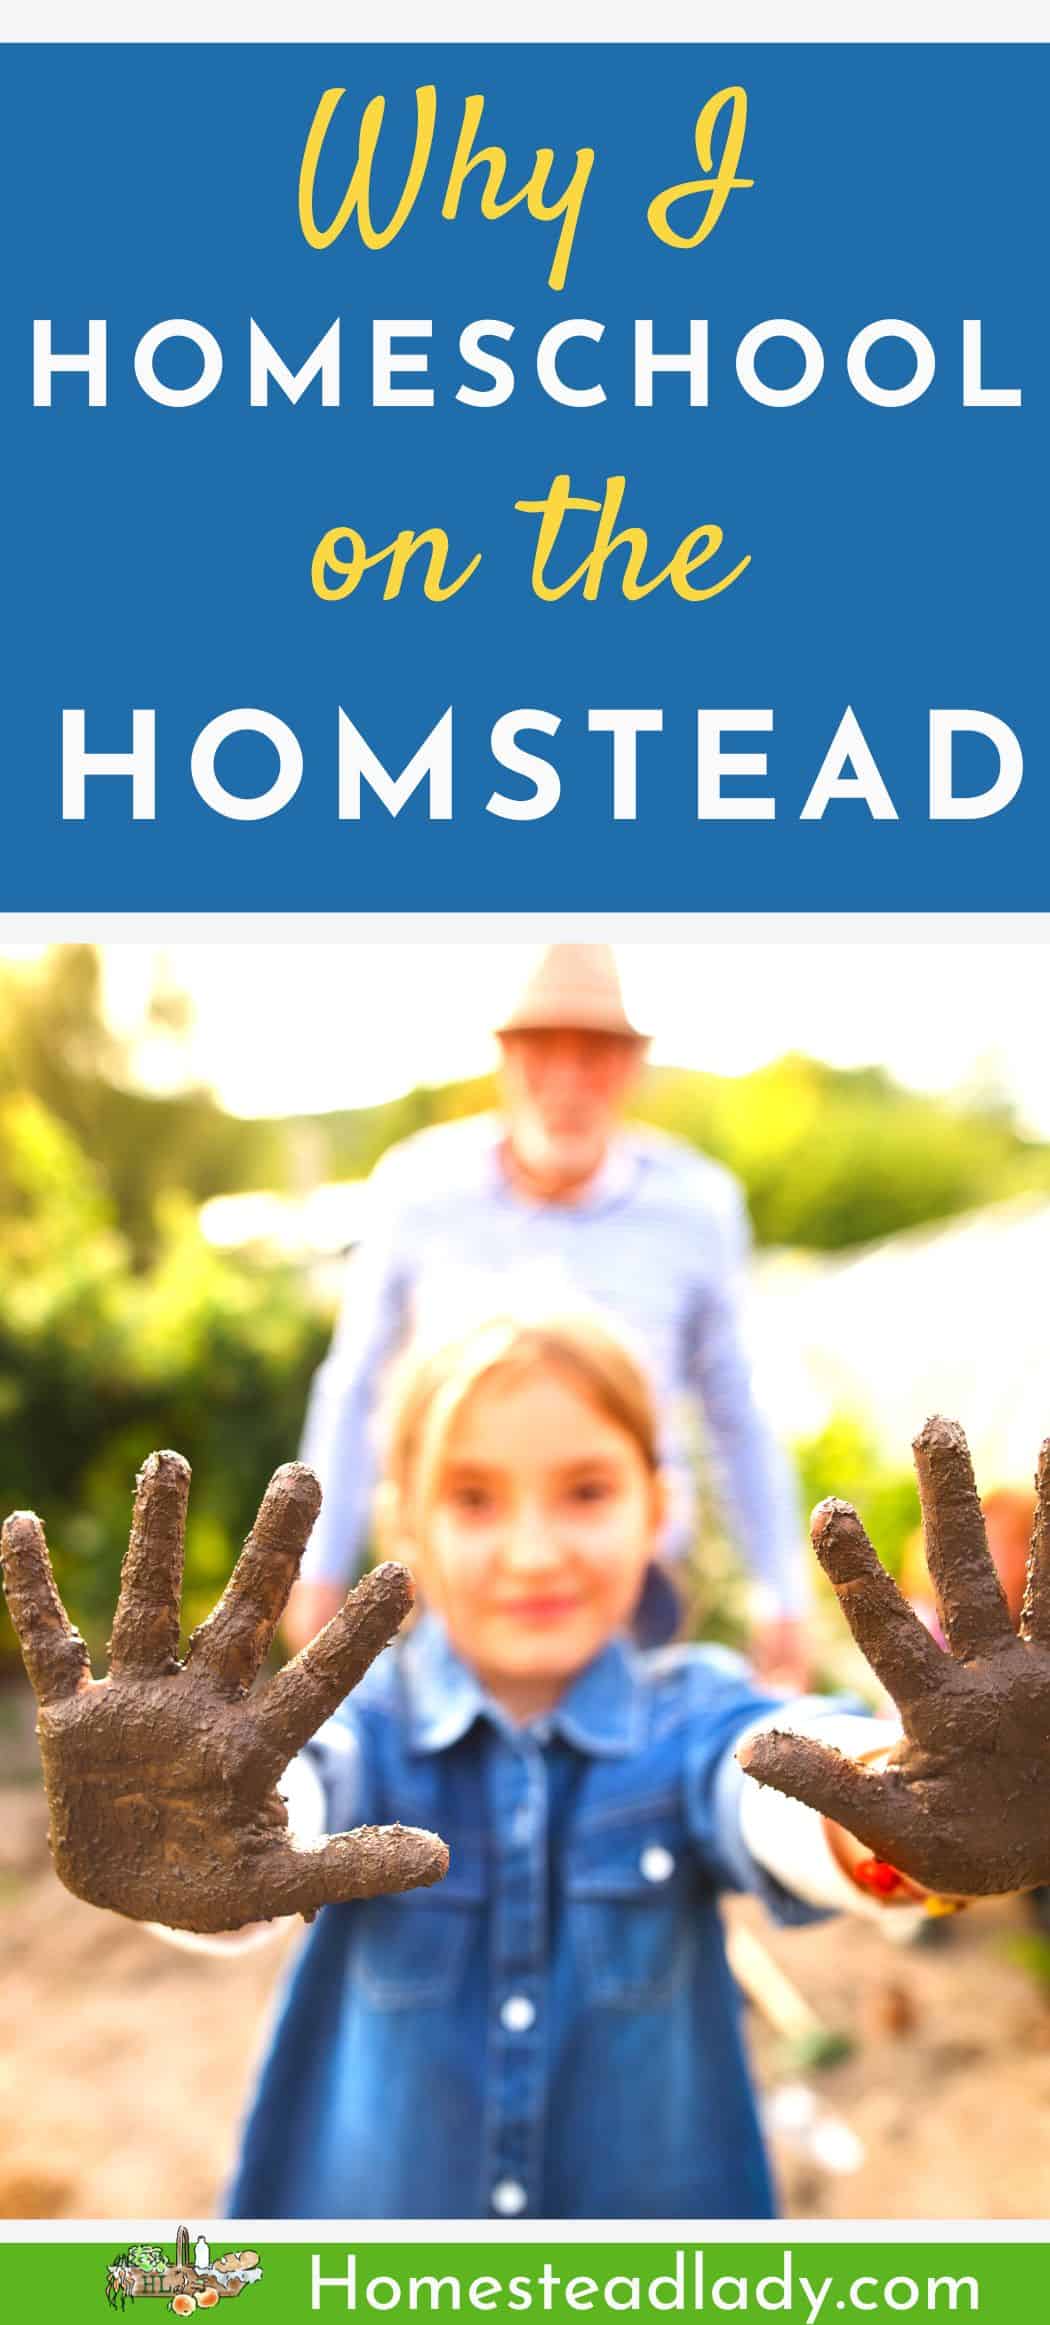 homeschooled kid on the homestead with muddy hands